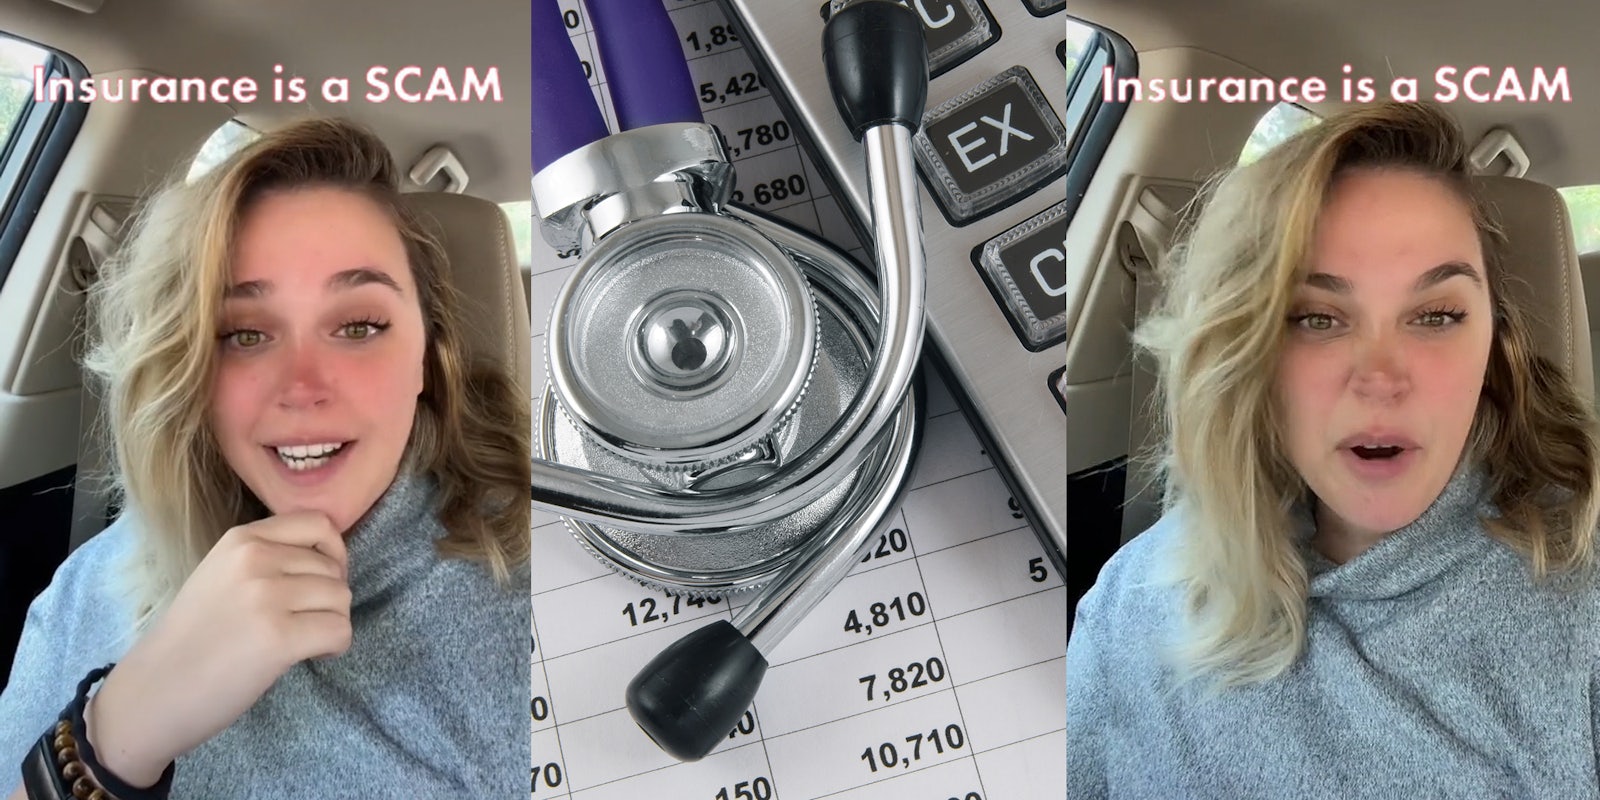 woman speaking in car caption 'Insurance is a SCAM' (l) Stethoscope with bills and calculator (c) woman speaking in car caption 'Insurance is a SCAM' (r)